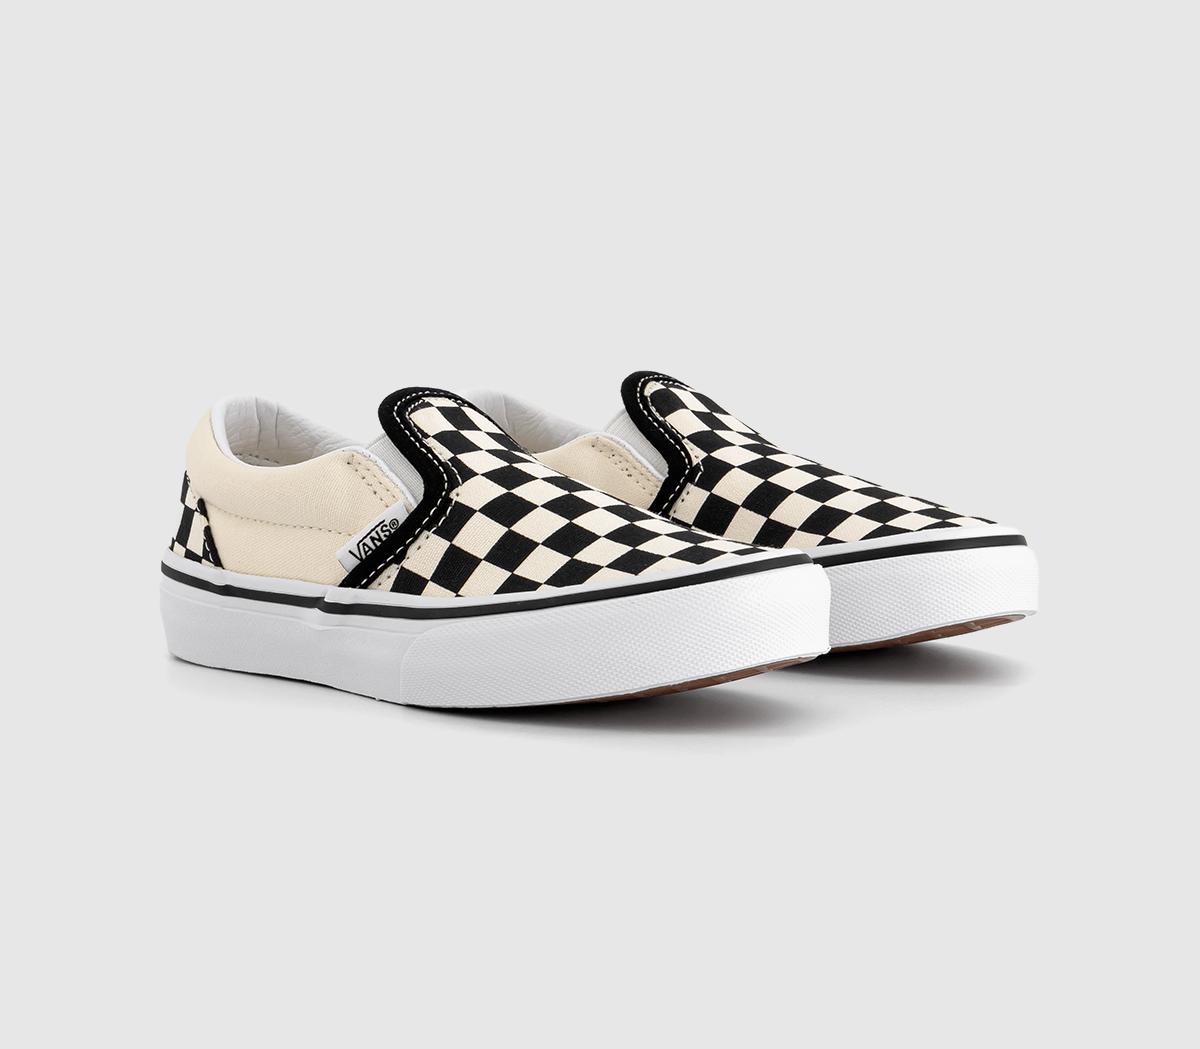 Vans Kids Black And White Checkerboard Classic Slip On Trainers, Size: 12 Youth